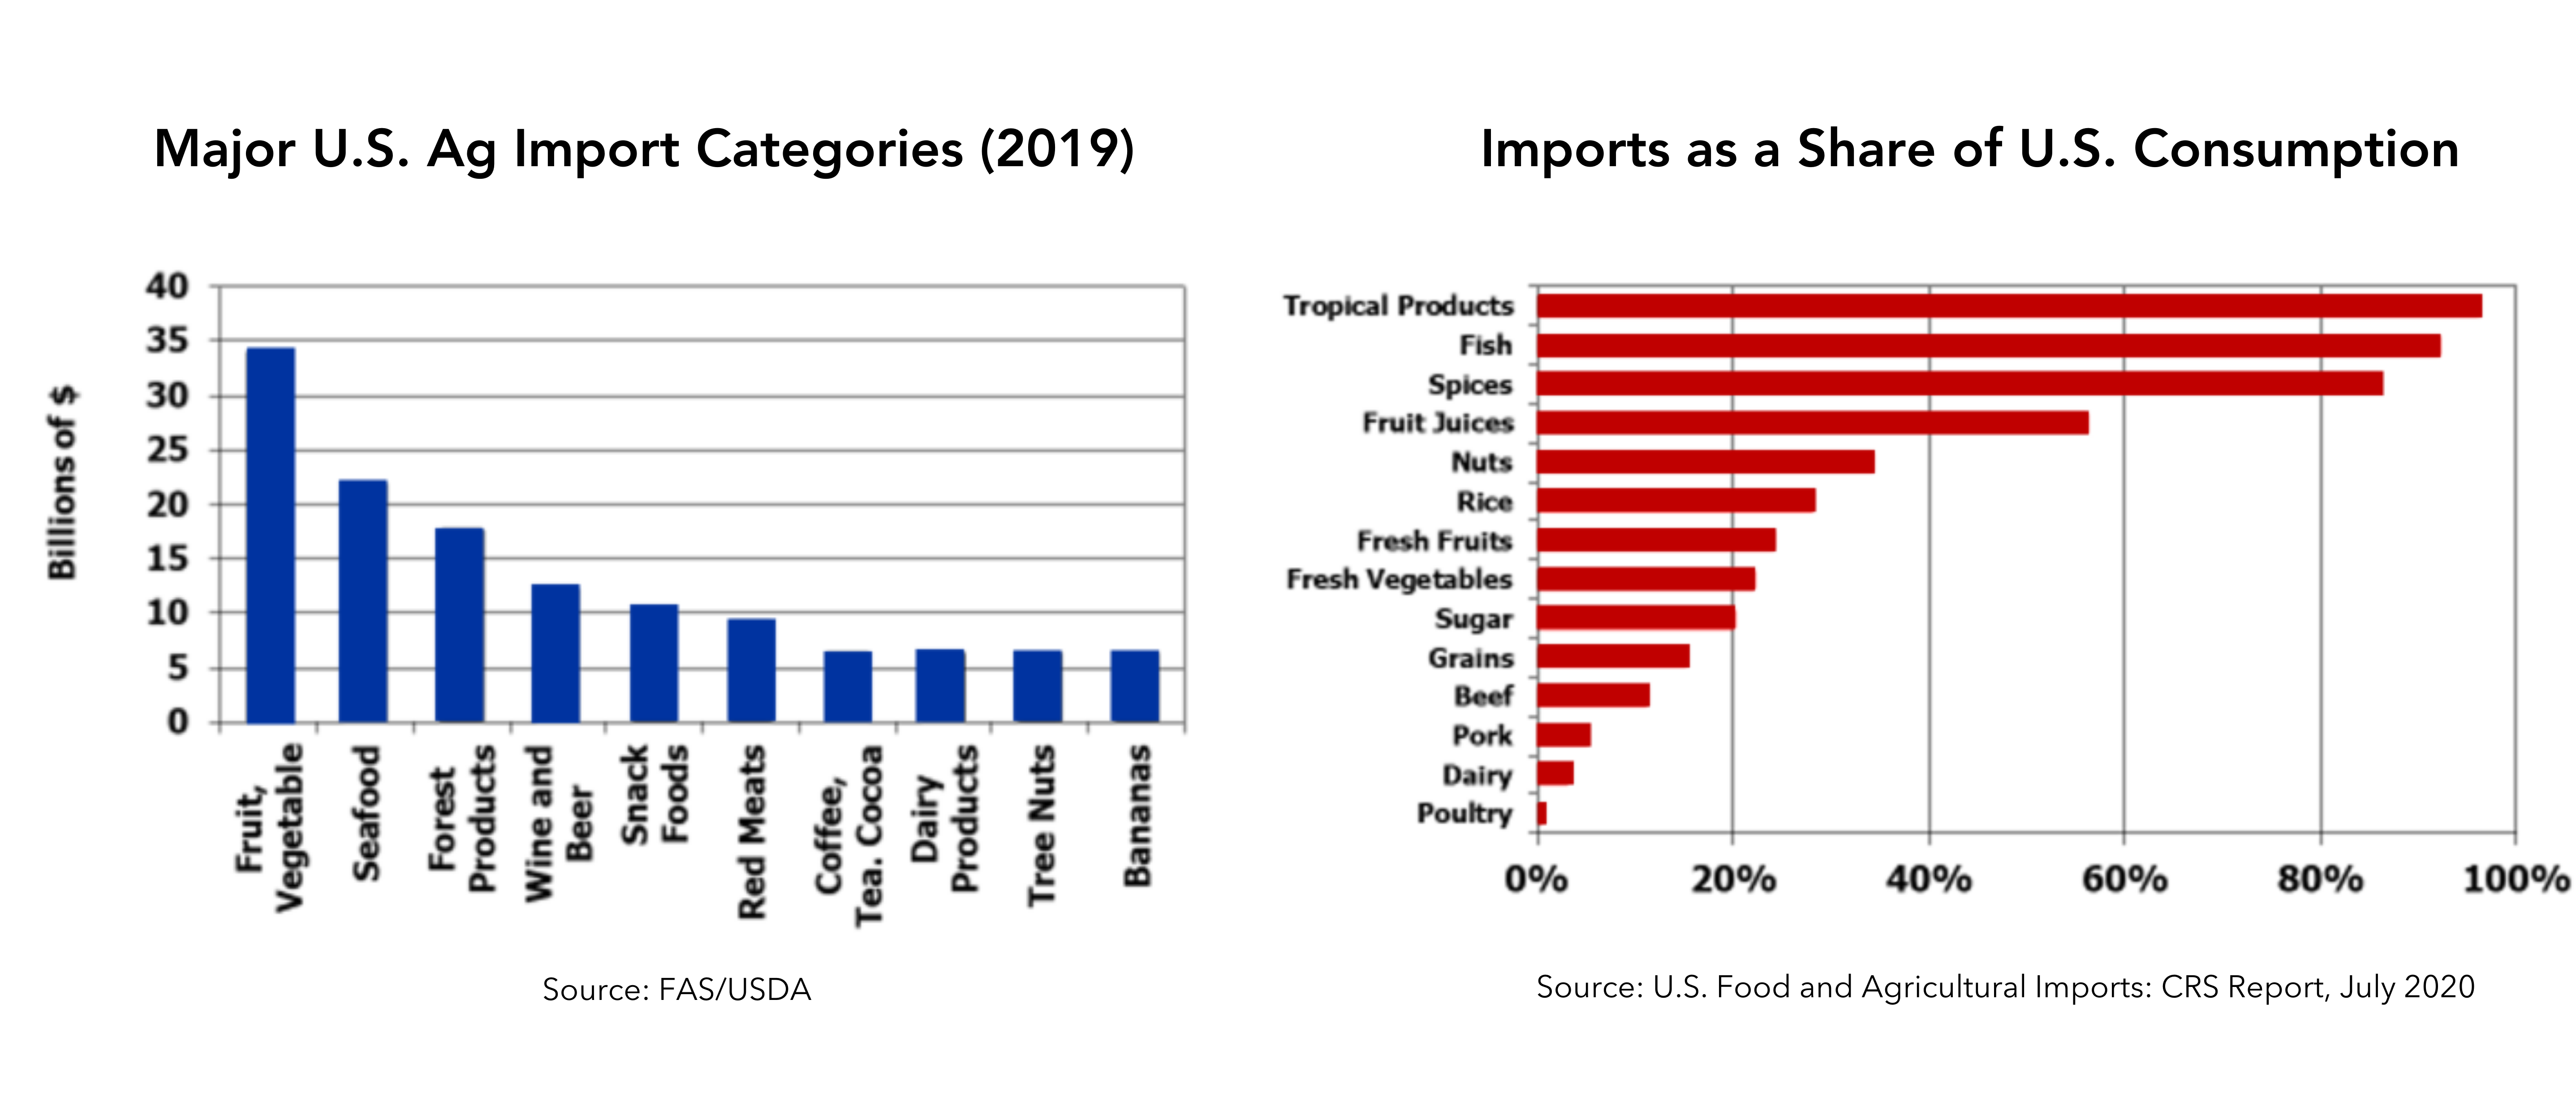 Graphs of Major U.S. Ag Import Categories (2019) and of Imports as a Share of U.S. Consumption